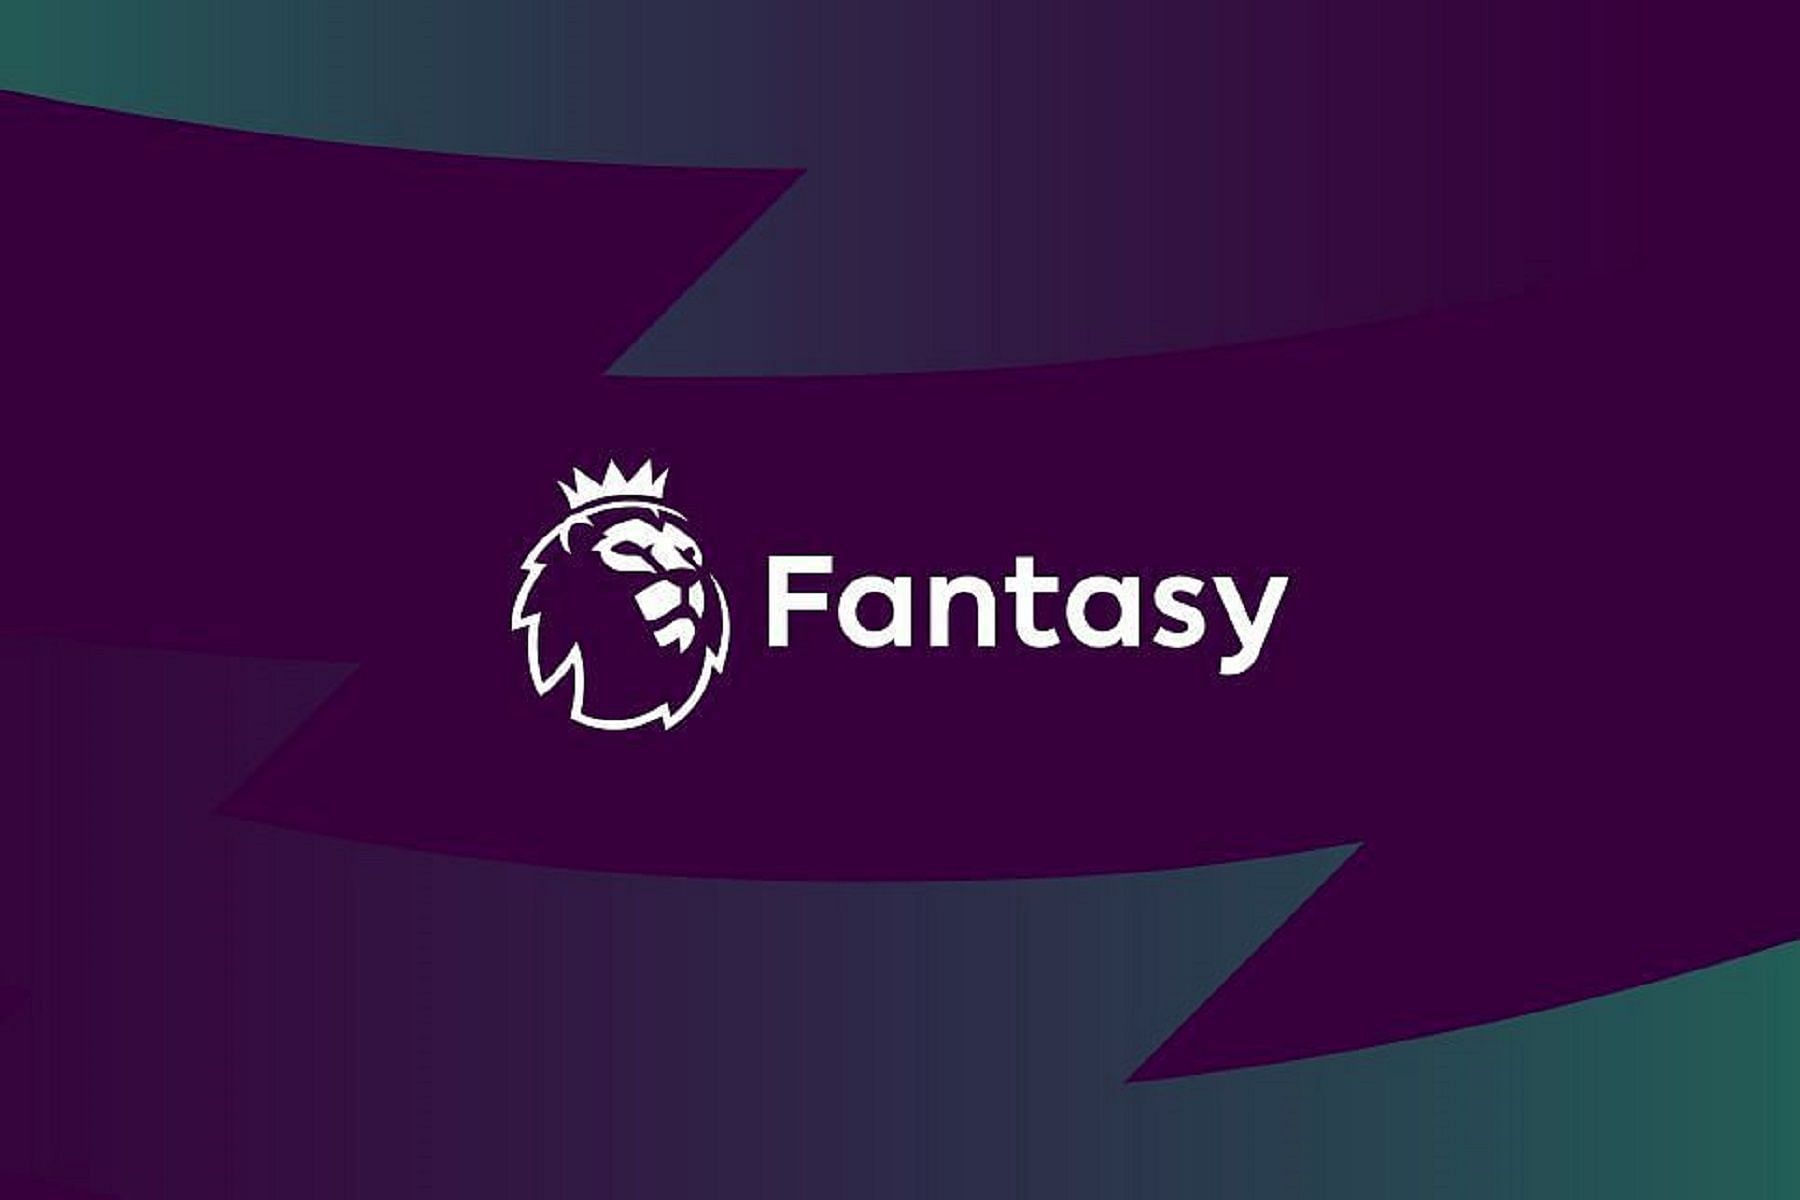 Are you using your Free Hit in DGW 33?